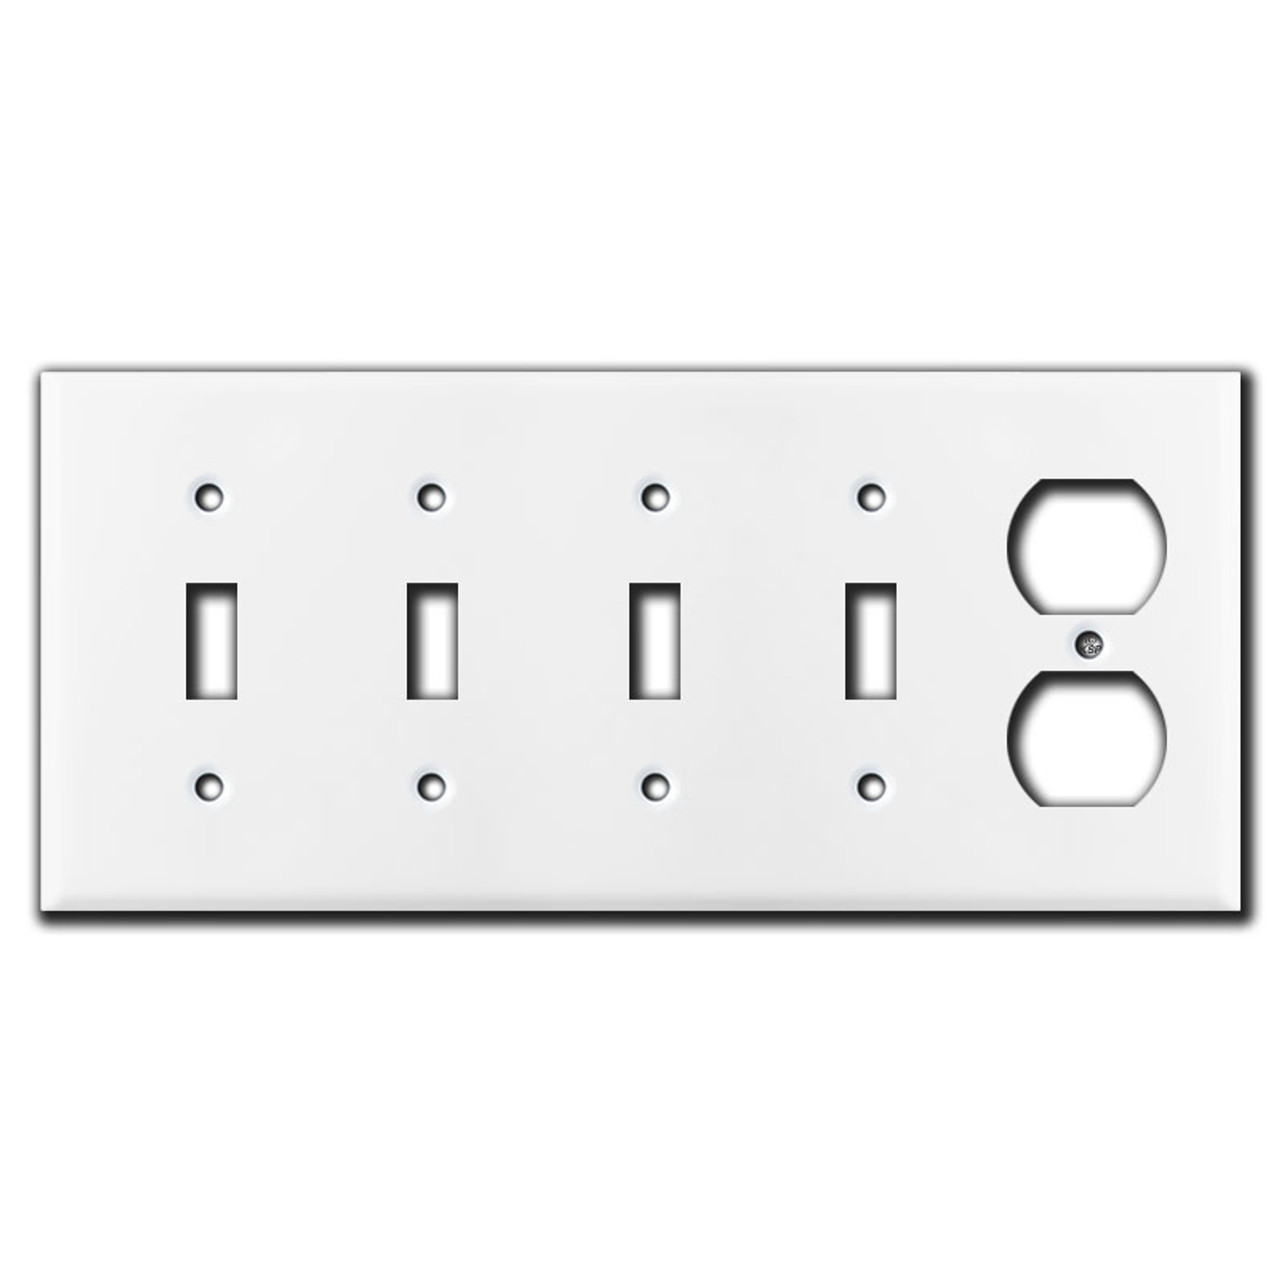 1 QTY Stainless Steel  Switch Plate Cover Outlet Rocker Toggle Duplex W/ Screws 